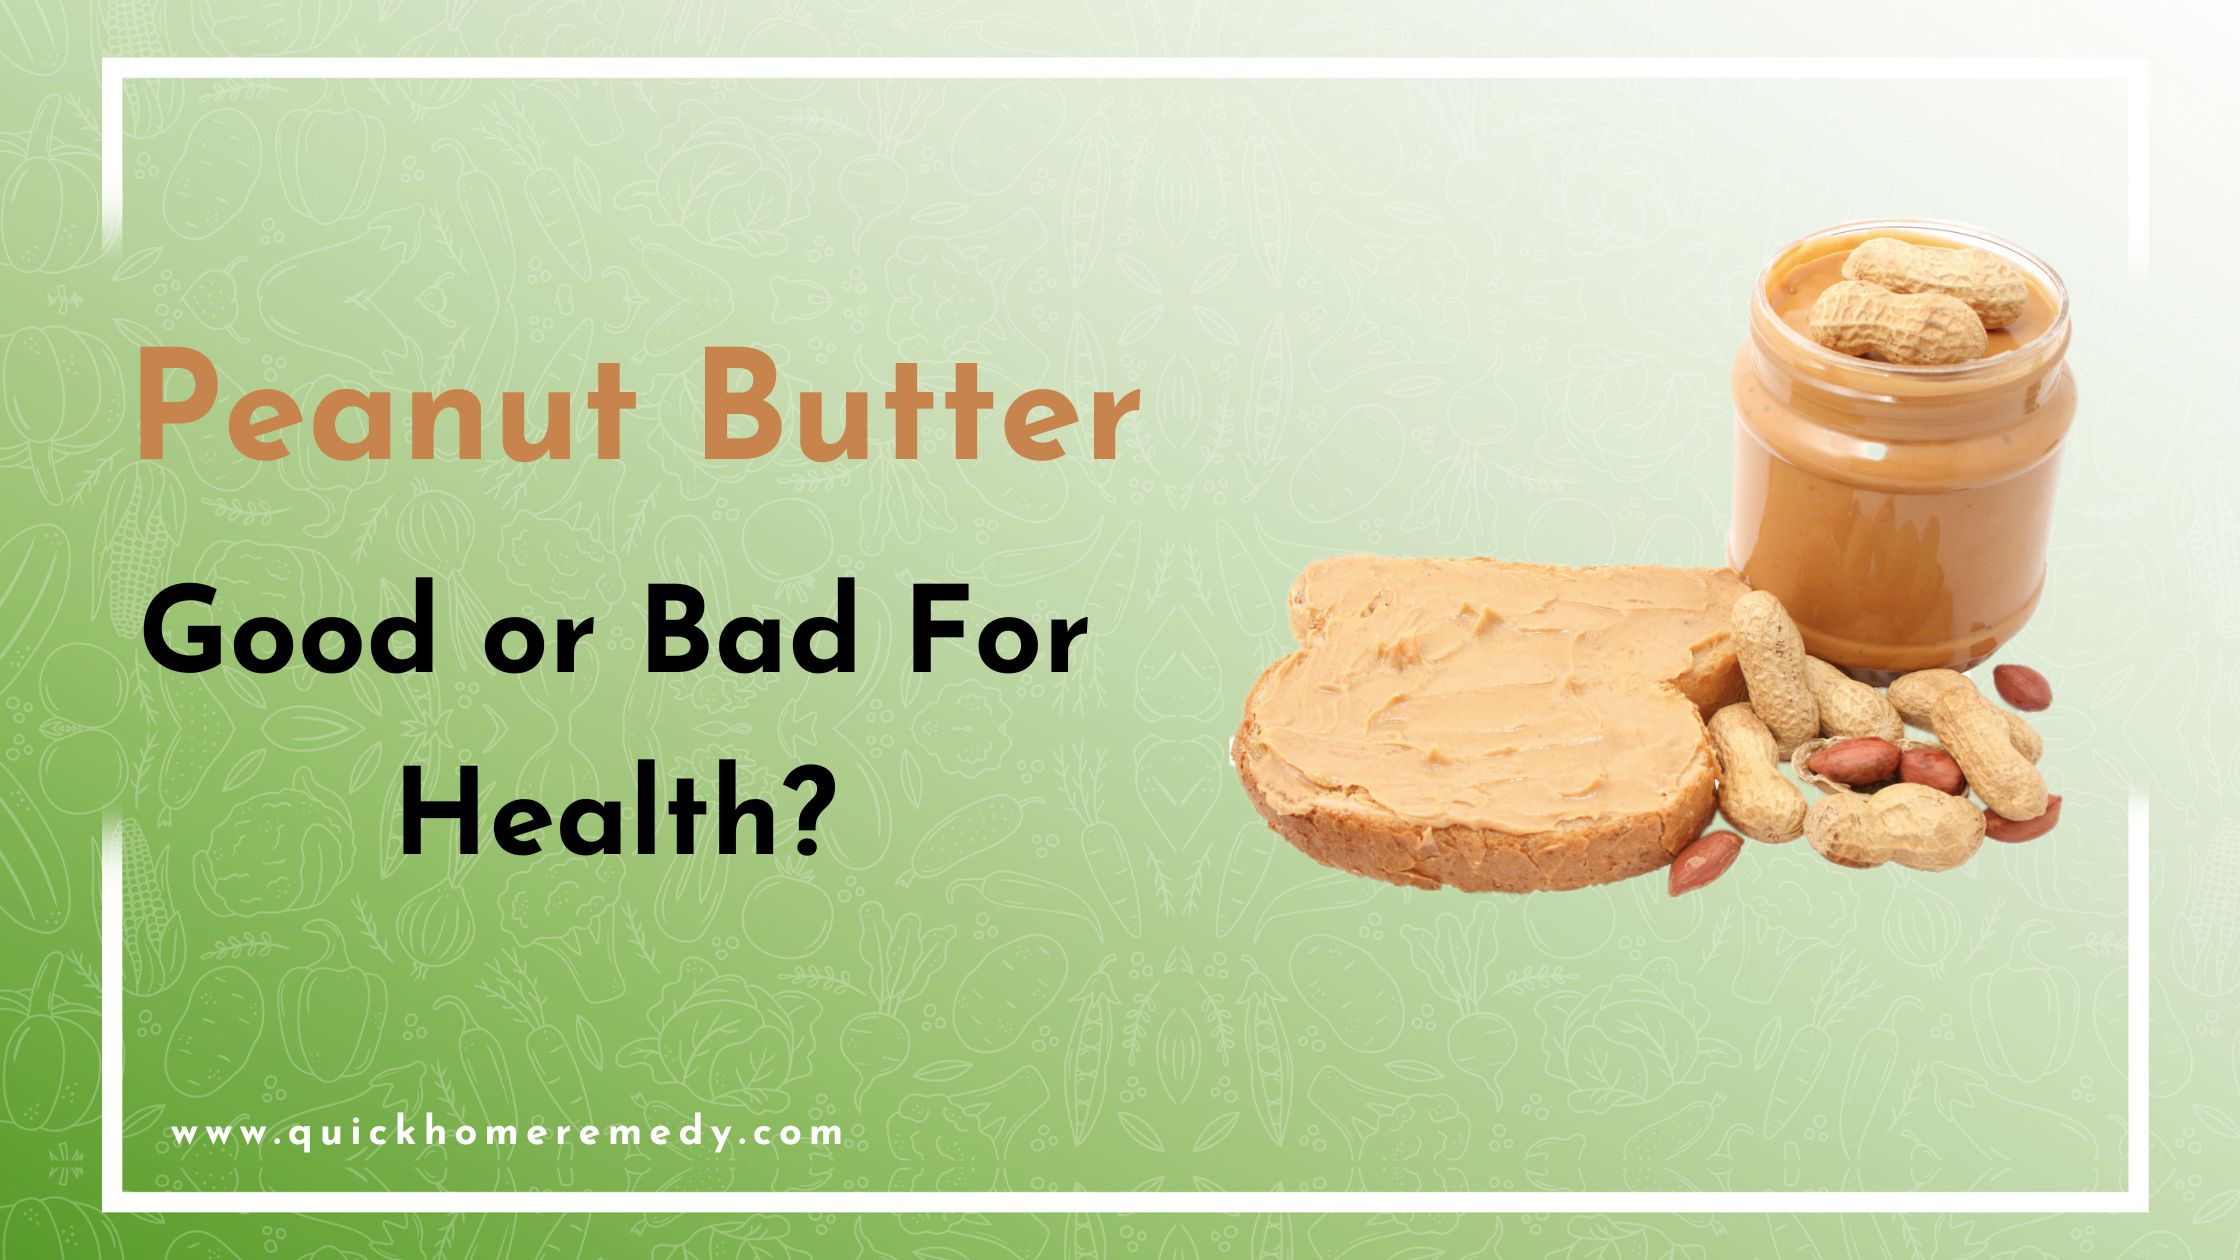 Peanut Butter Good or Bad For Health